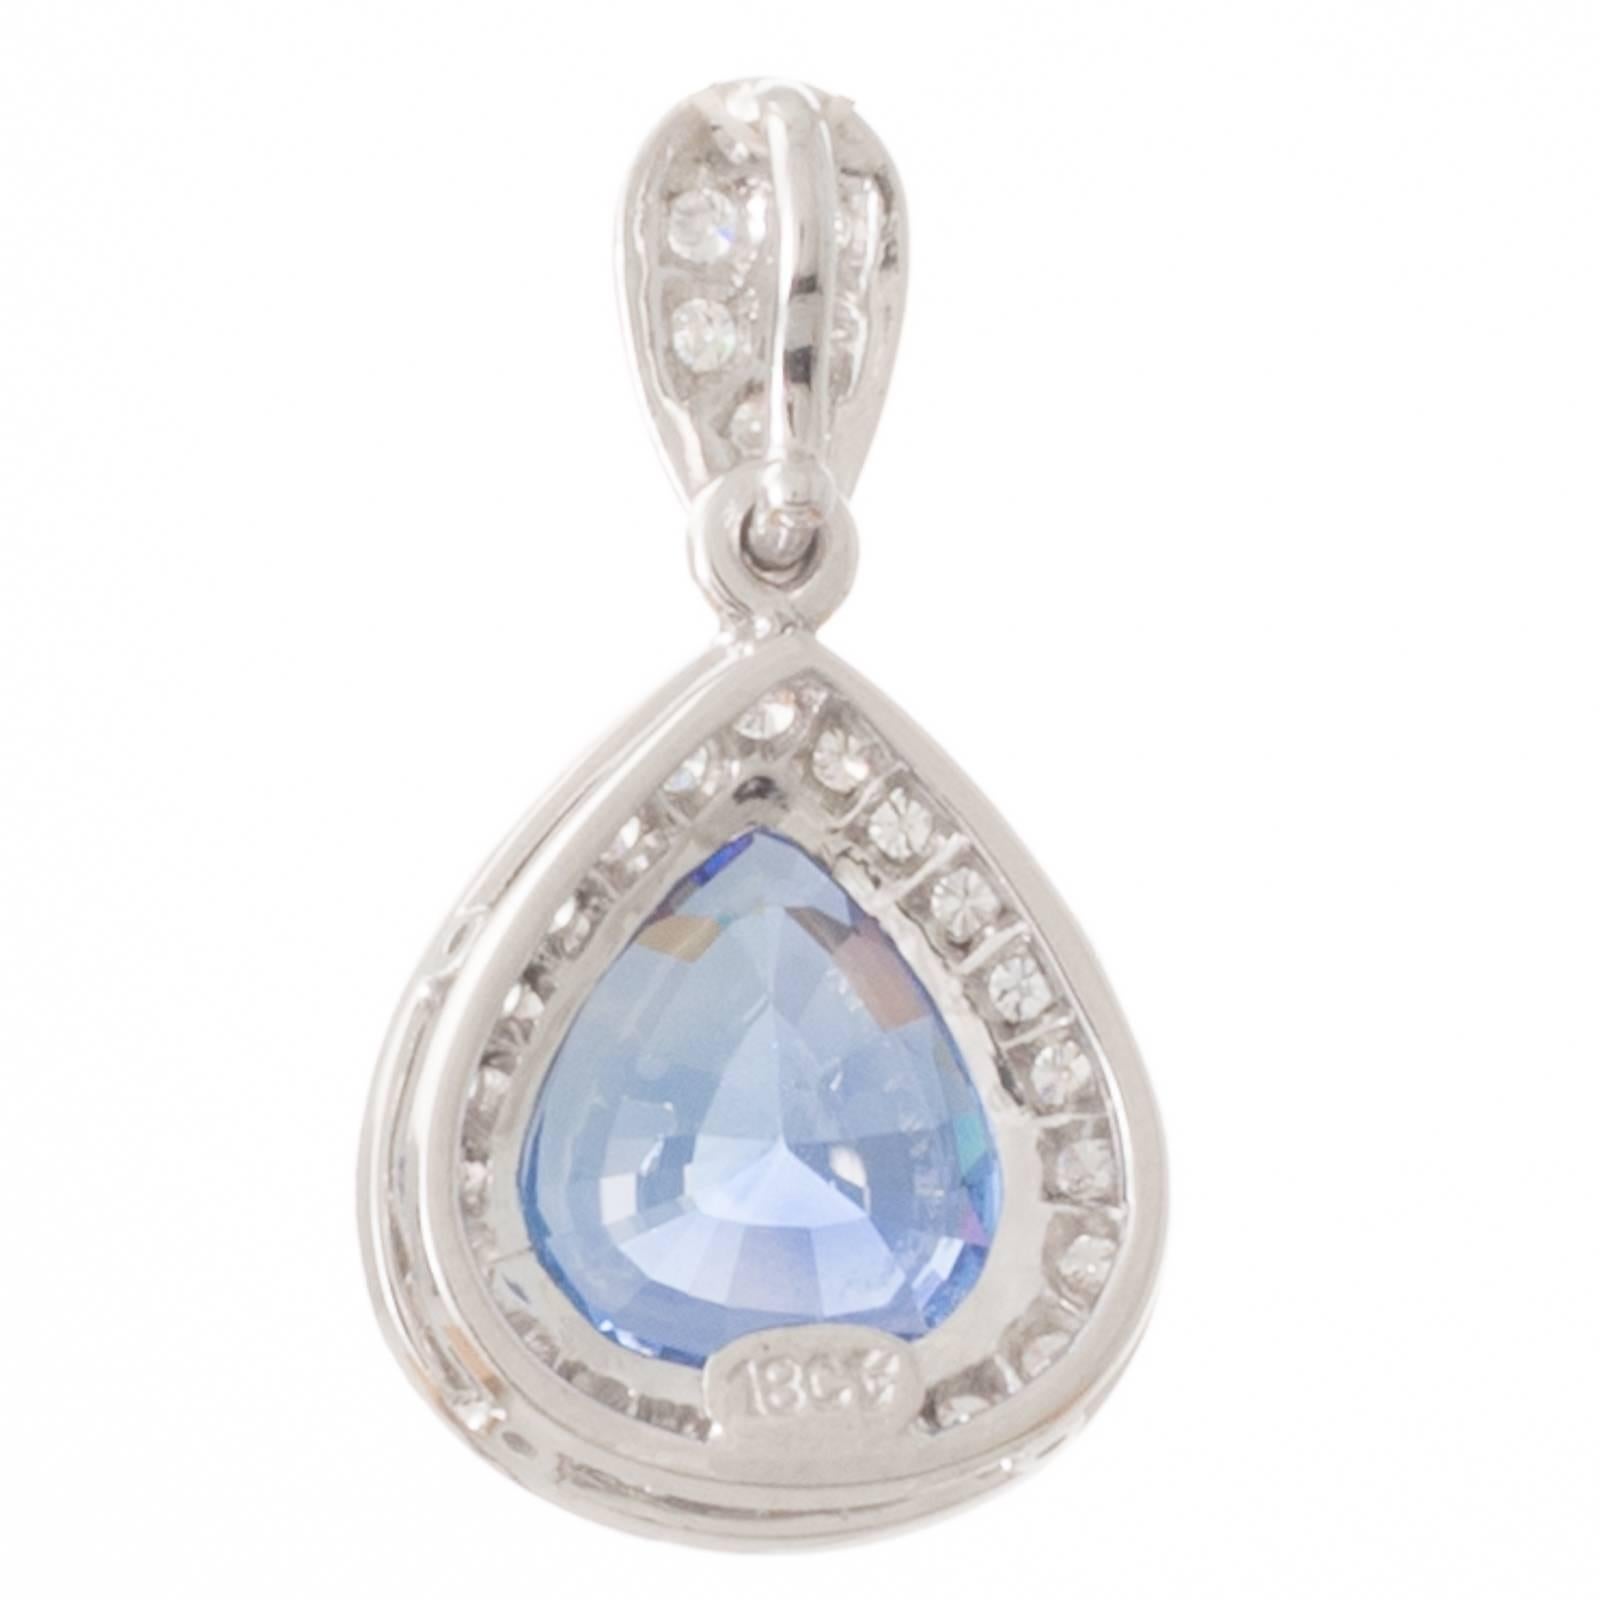 An 18ct white gold pendant with a GIA certified 3.54ct pear shaped Sri Lankan sapphire surrounded by a border of twenty two grain set brilliant cut diamonds with a millegrain edge below an articulated diamond set bail. 
Total Sapphire Weight: 3.54ct